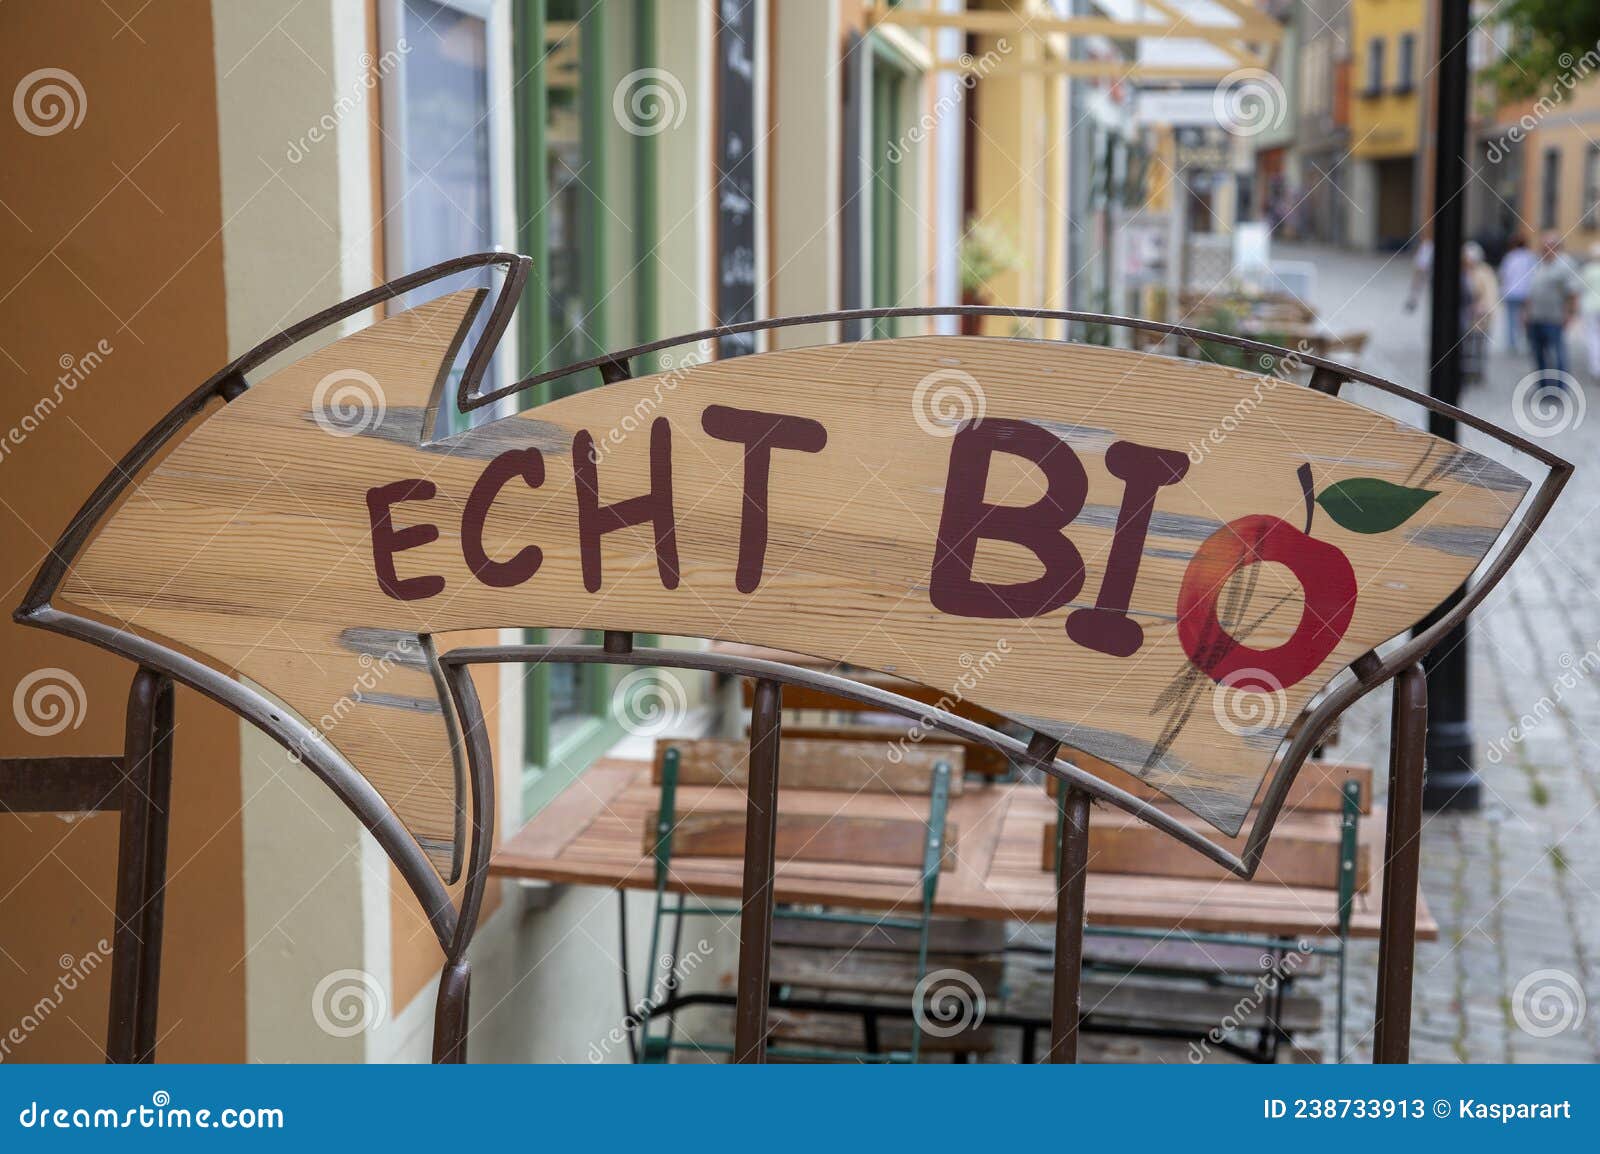 german directional sign translates into real organic in english